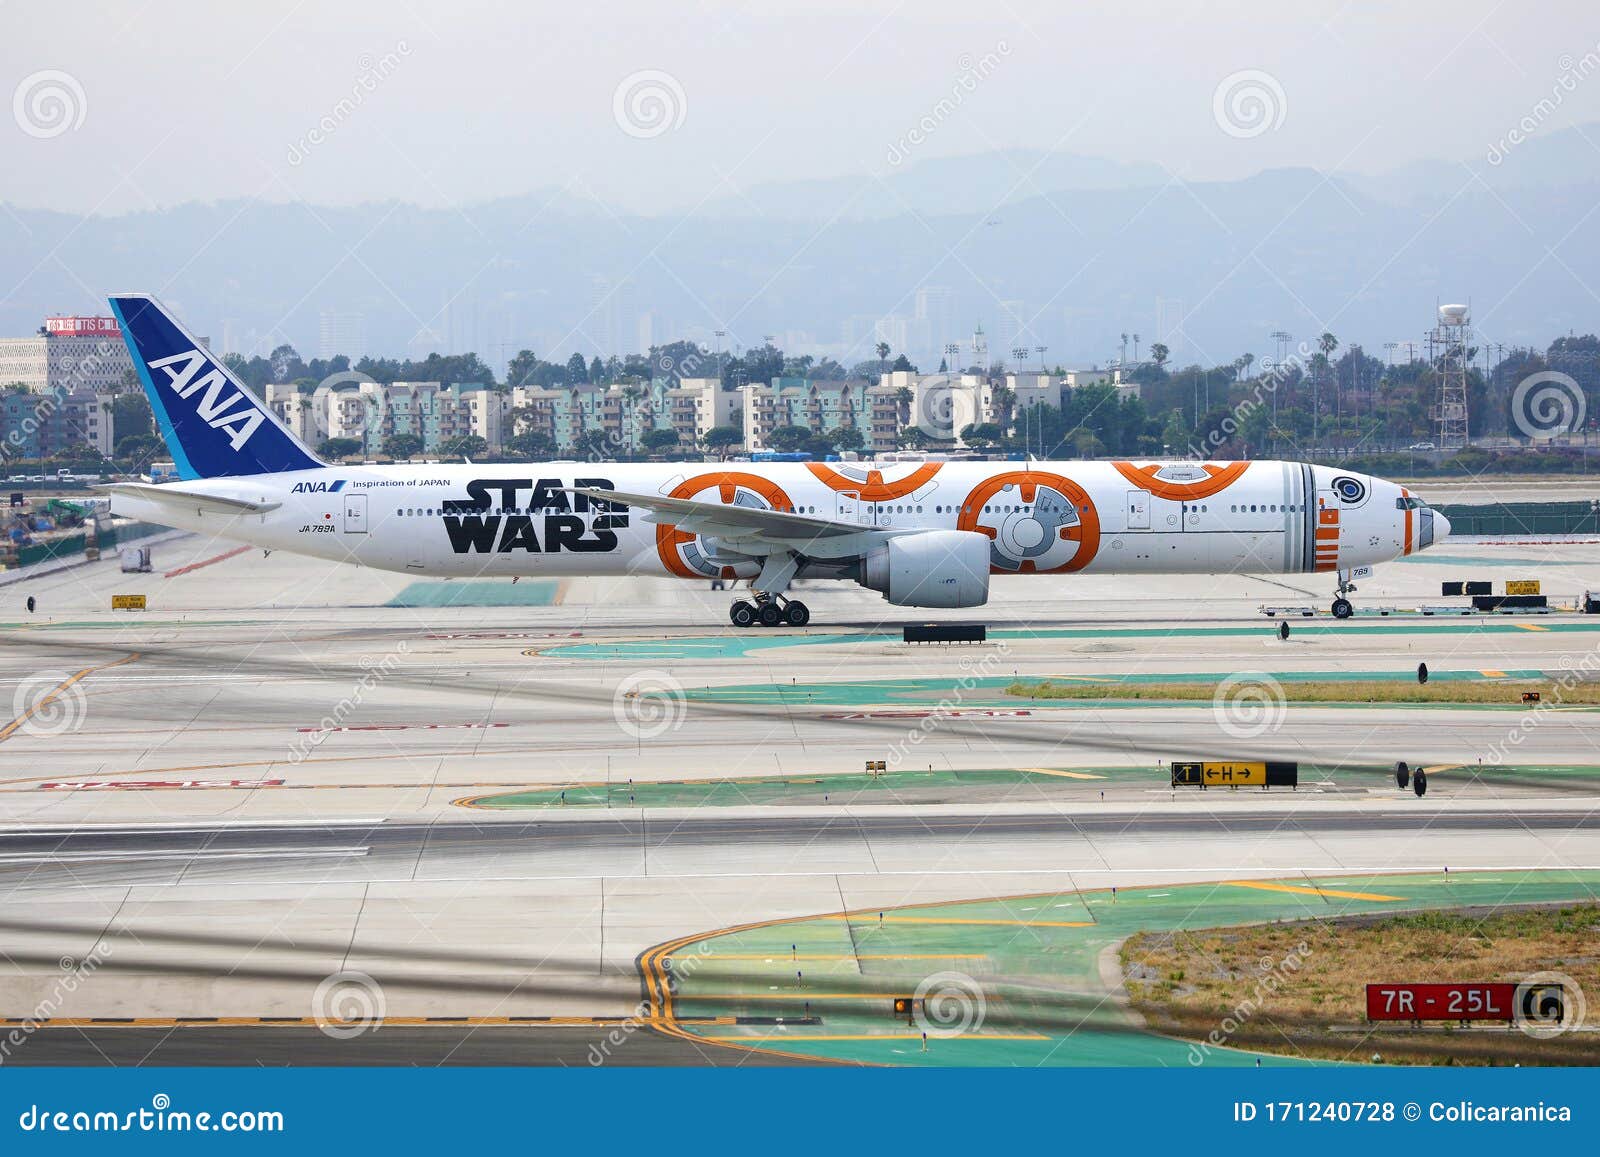 All Nippon Airways Ana Plane Star Wars Livery Taxiing In Los Angeles Airport Lax Editorial Stock Photo Image Of Airbus Cityline